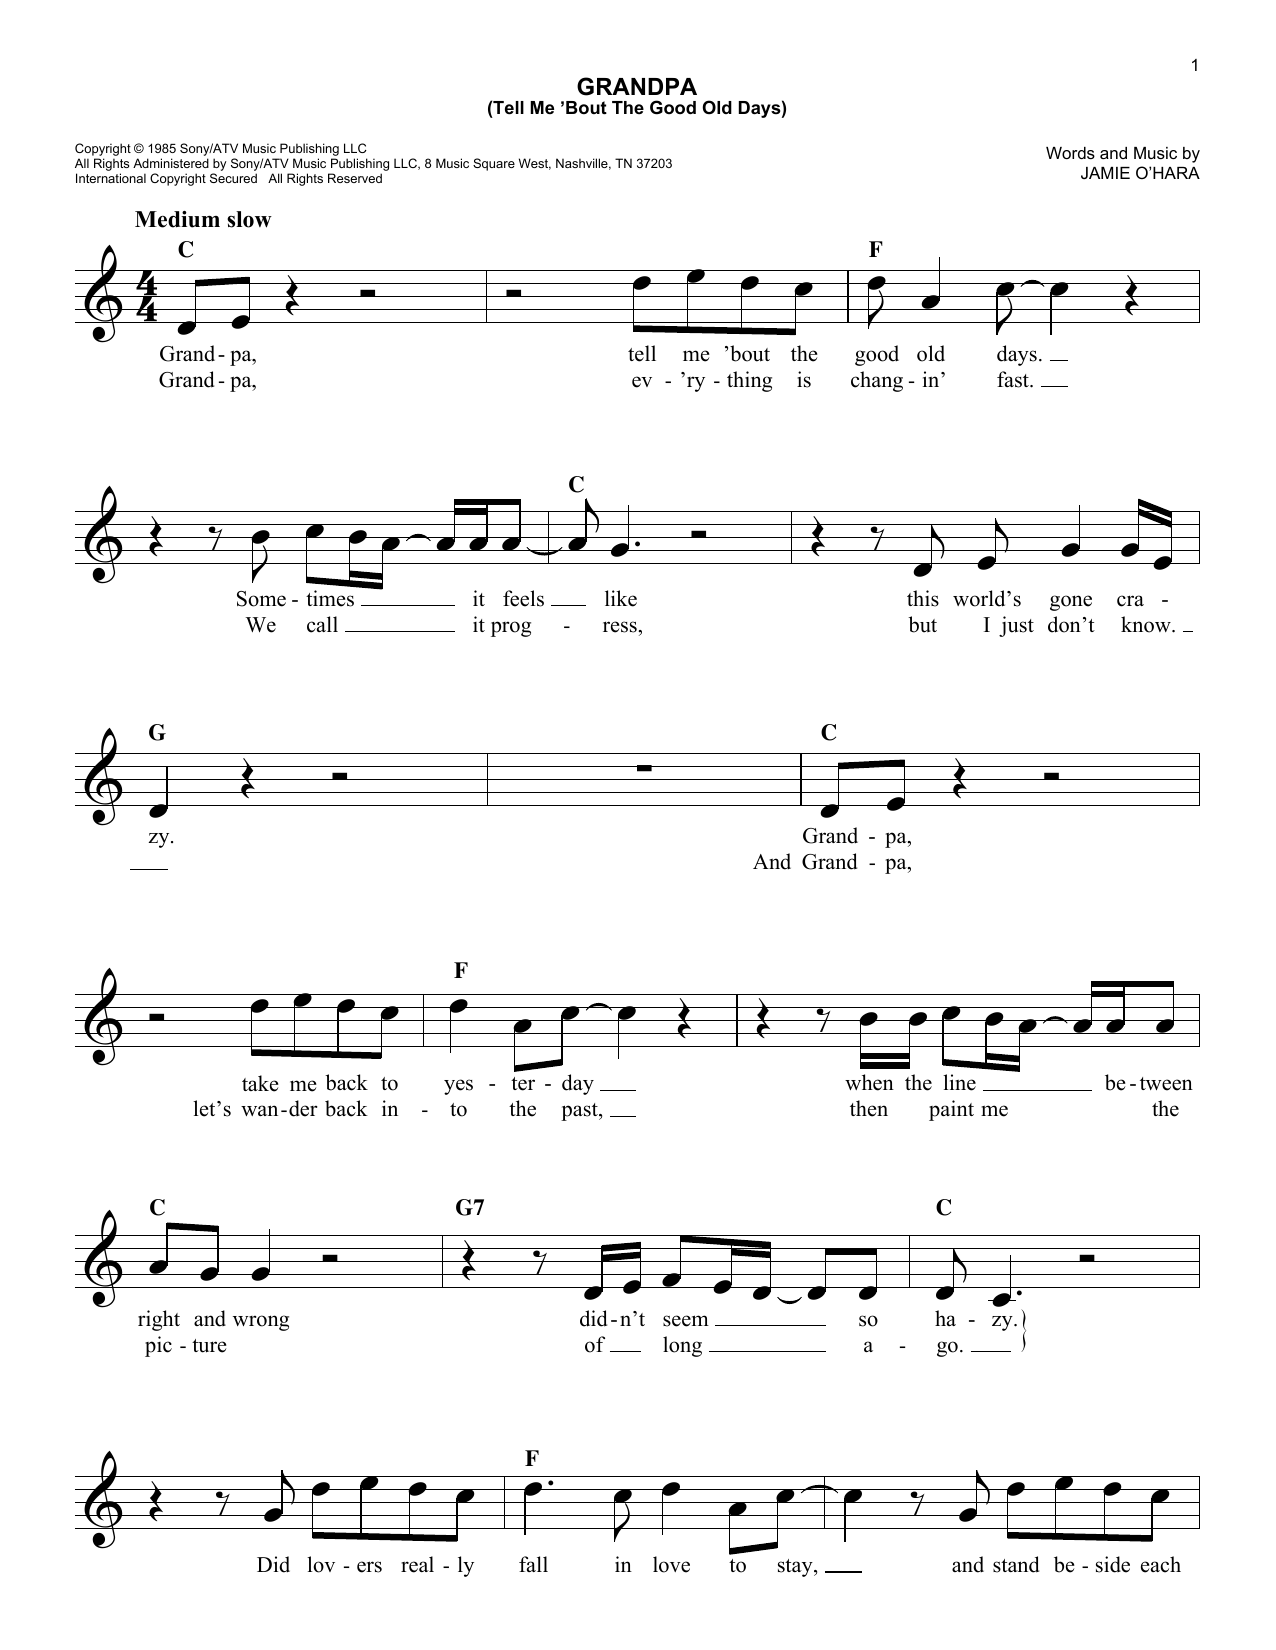 Download The Judds Grandpa (Tell Me 'Bout The Good Old Day Sheet Music